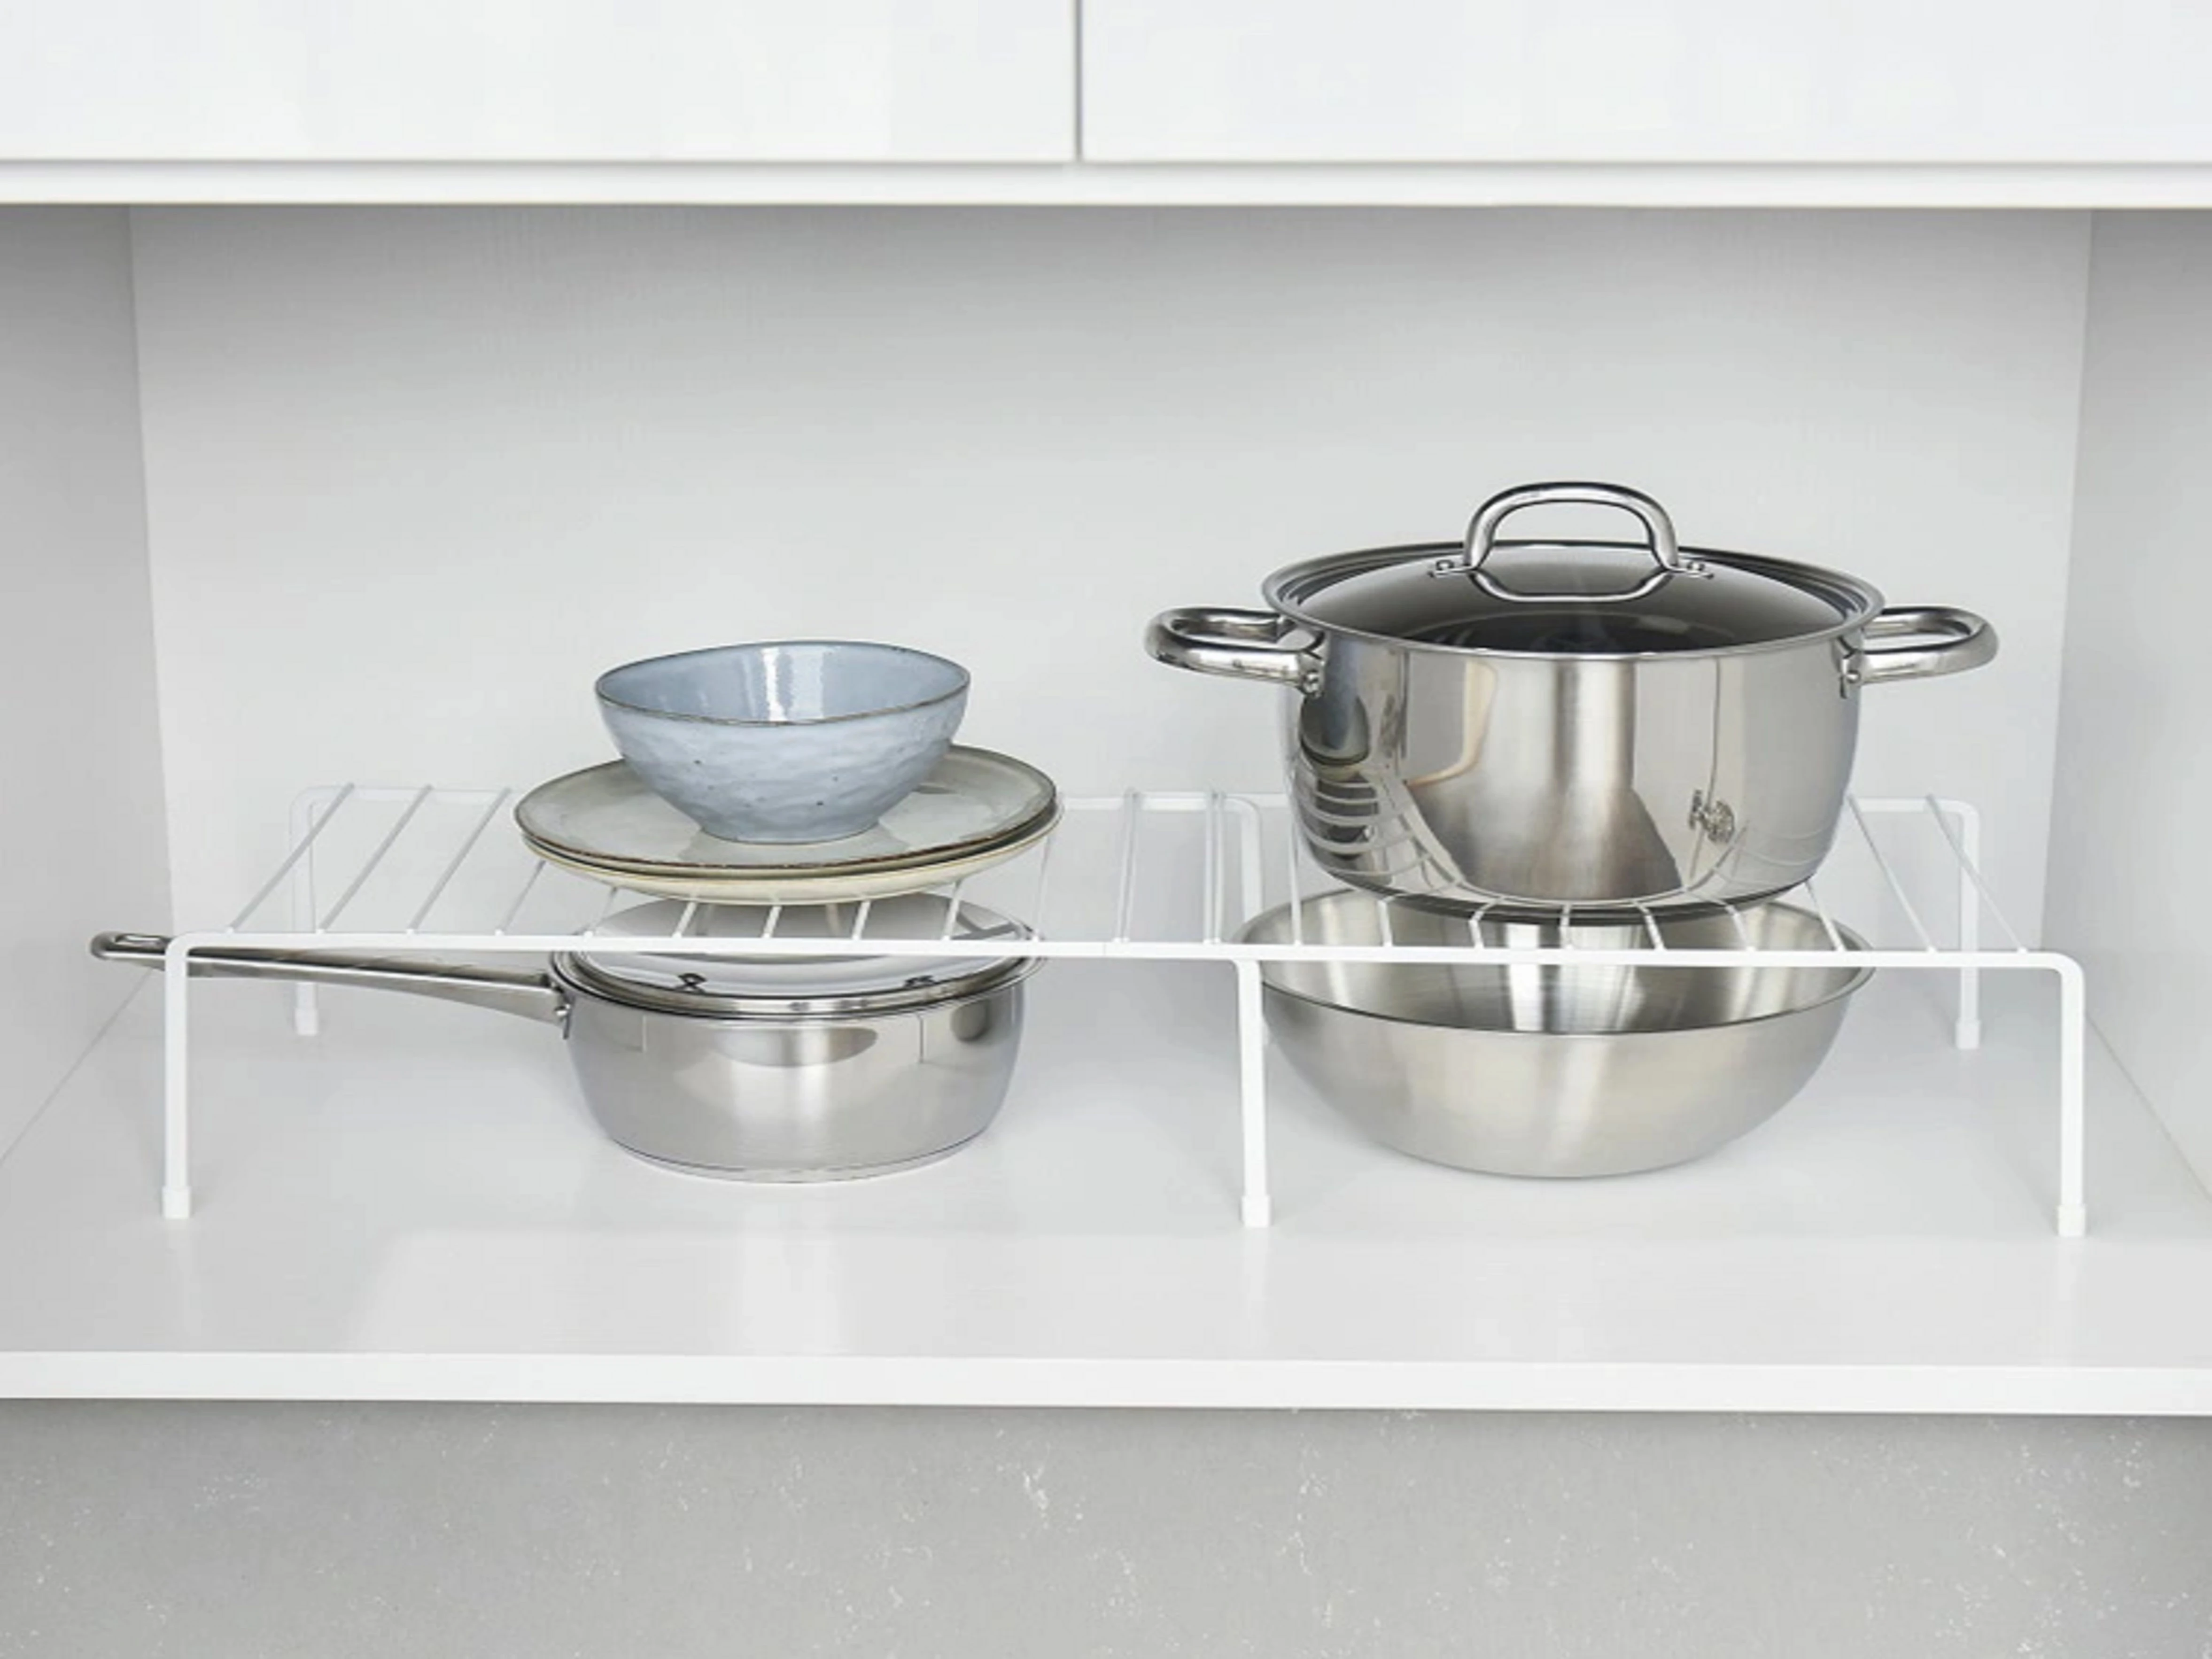 Comparing Different Steel Corner Shelves For Kitchen: Which Type Is Right